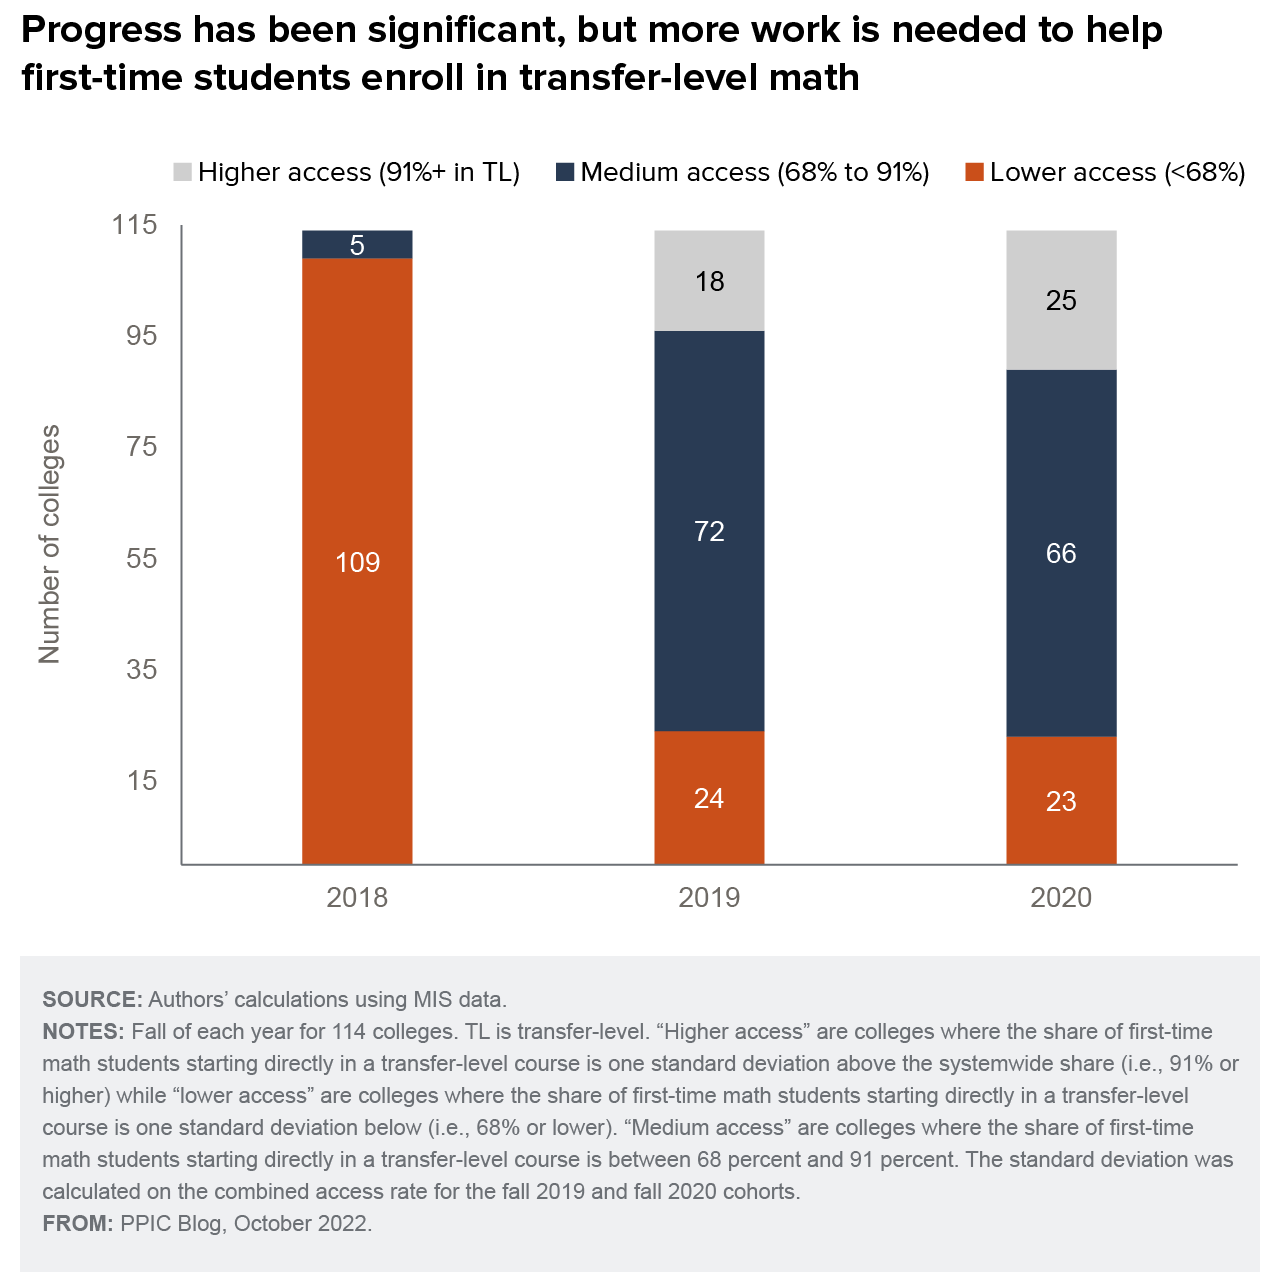 figure - Progress has been significant, but more work is needed to help first-time students enroll in transfer-level math